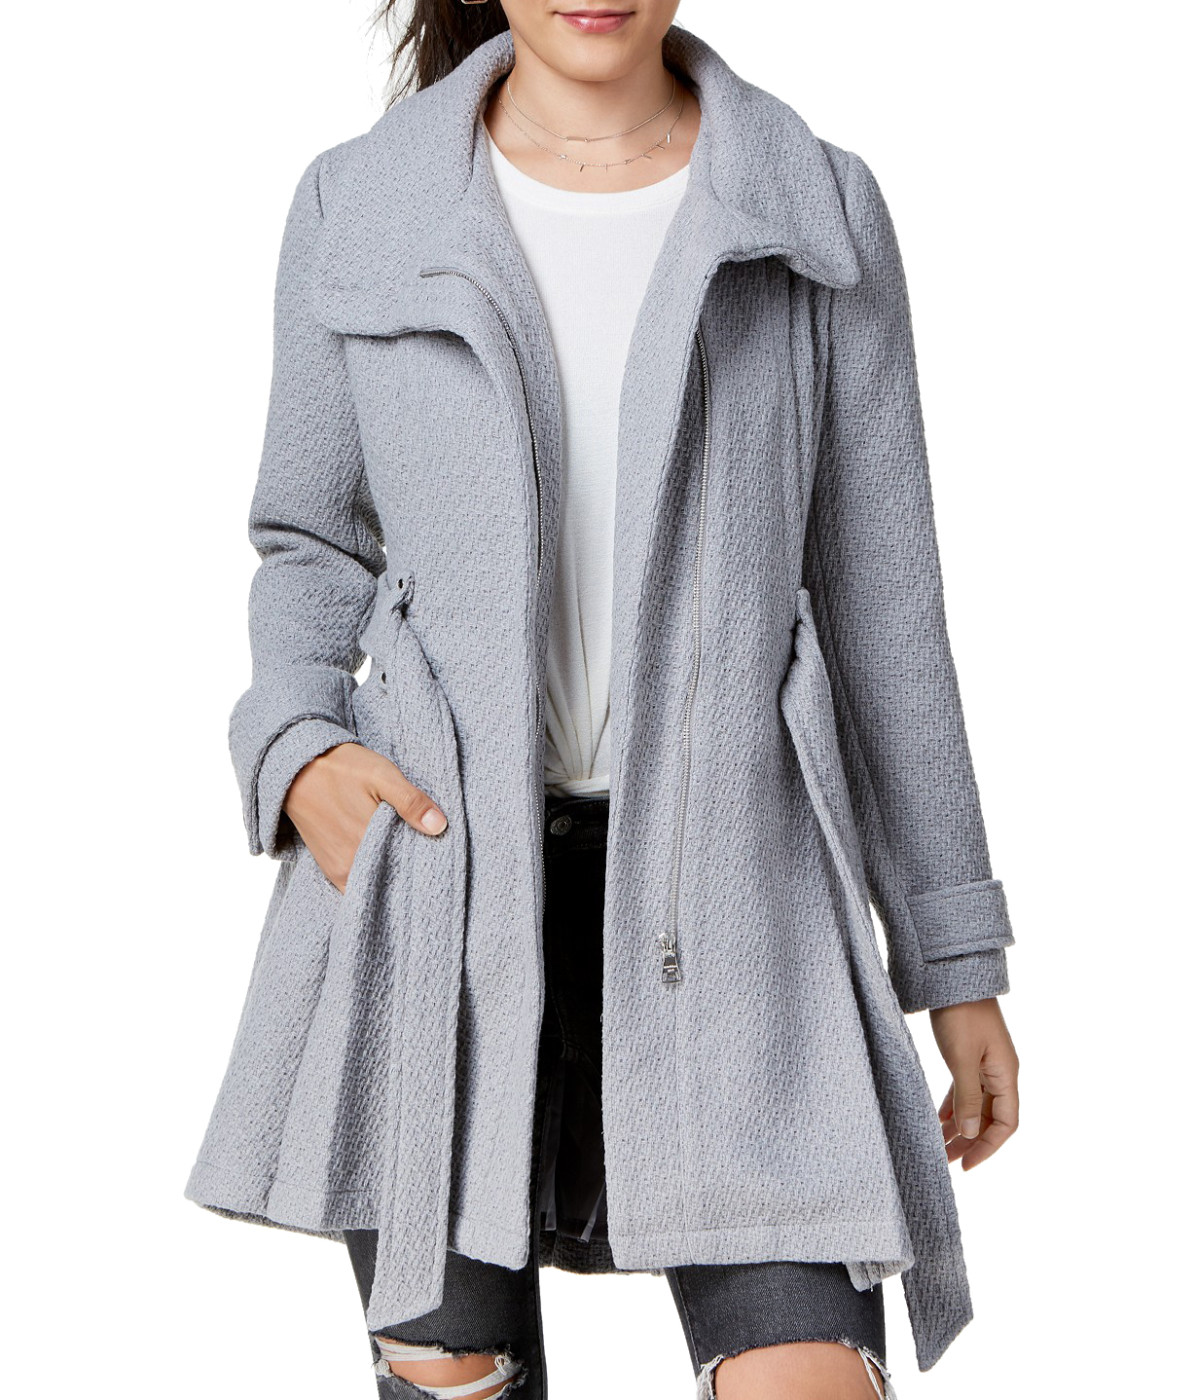 woocommerce-673321-2209615.cloudwaysapps.com-madden-girl-womens-gray-wool-blend-textured-belted-wrap-coat